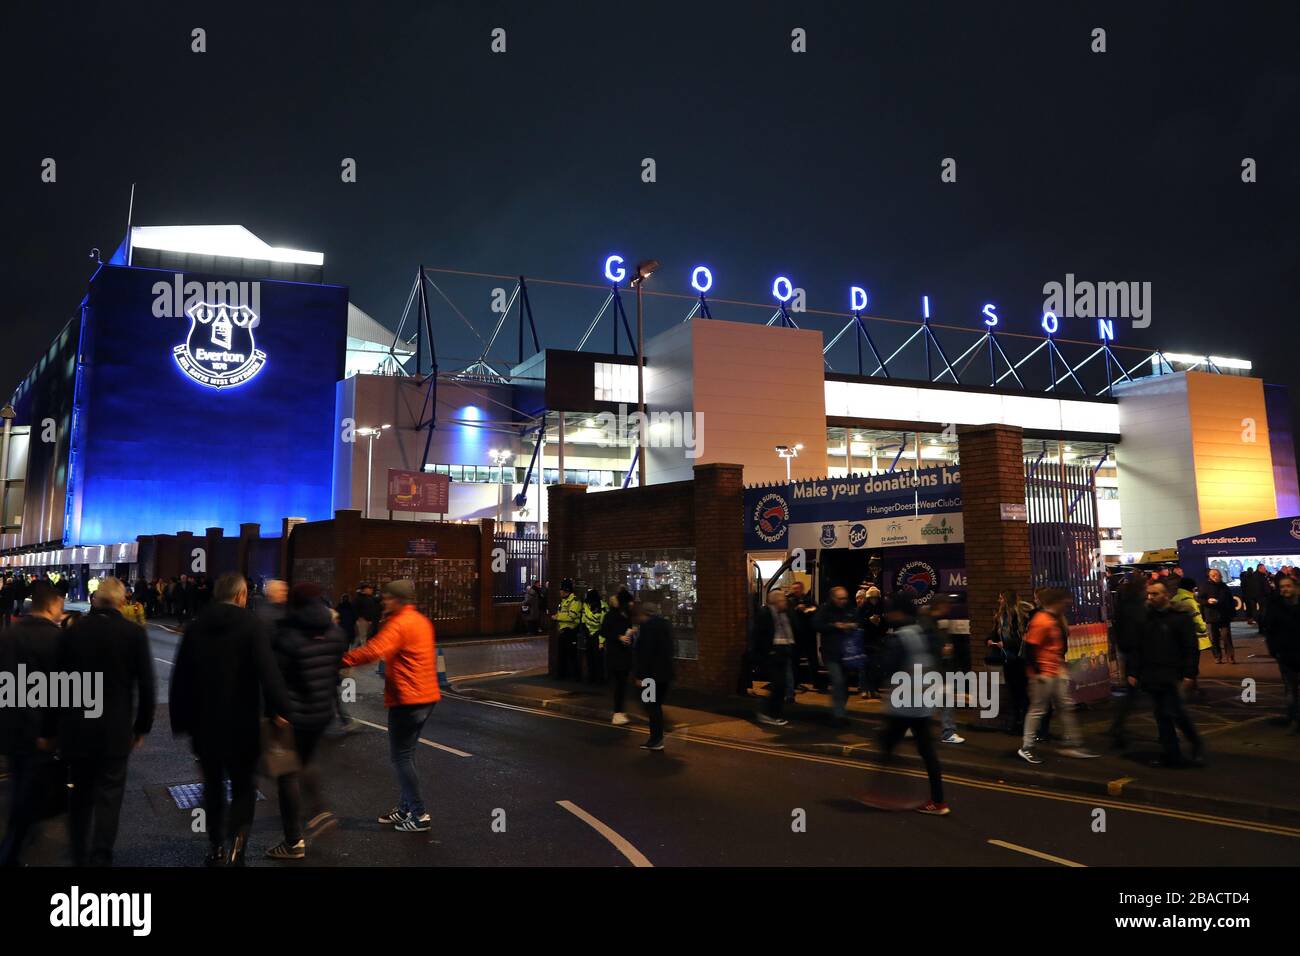 Fans arrive at Goodison Park ahead of the match Stock Photo